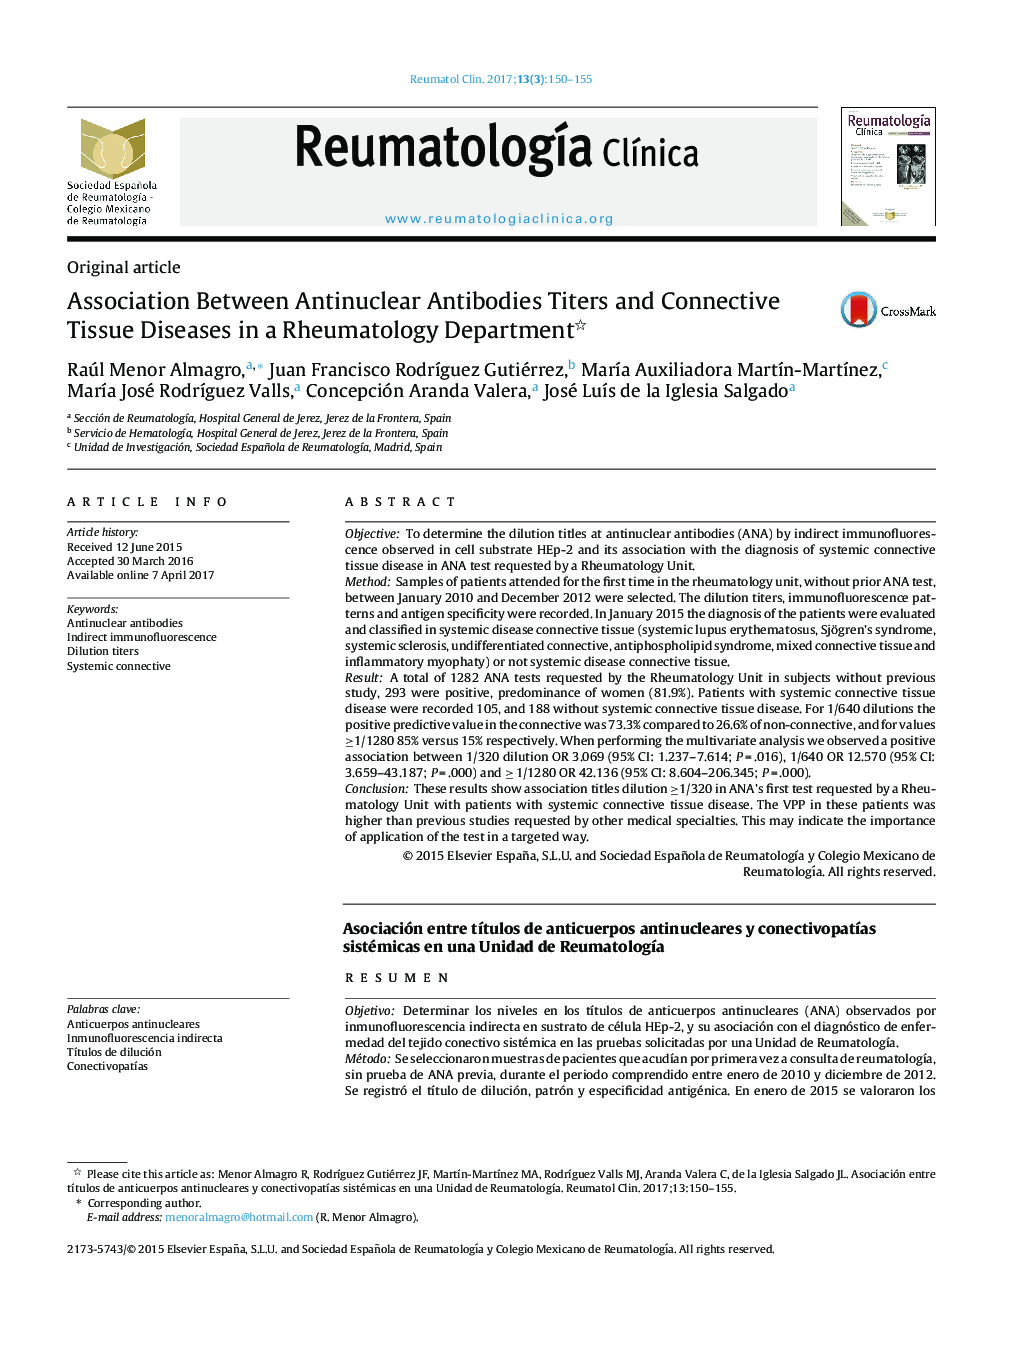 Association Between Antinuclear Antibodies Titers and Connective Tissue Diseases in a Rheumatology Department